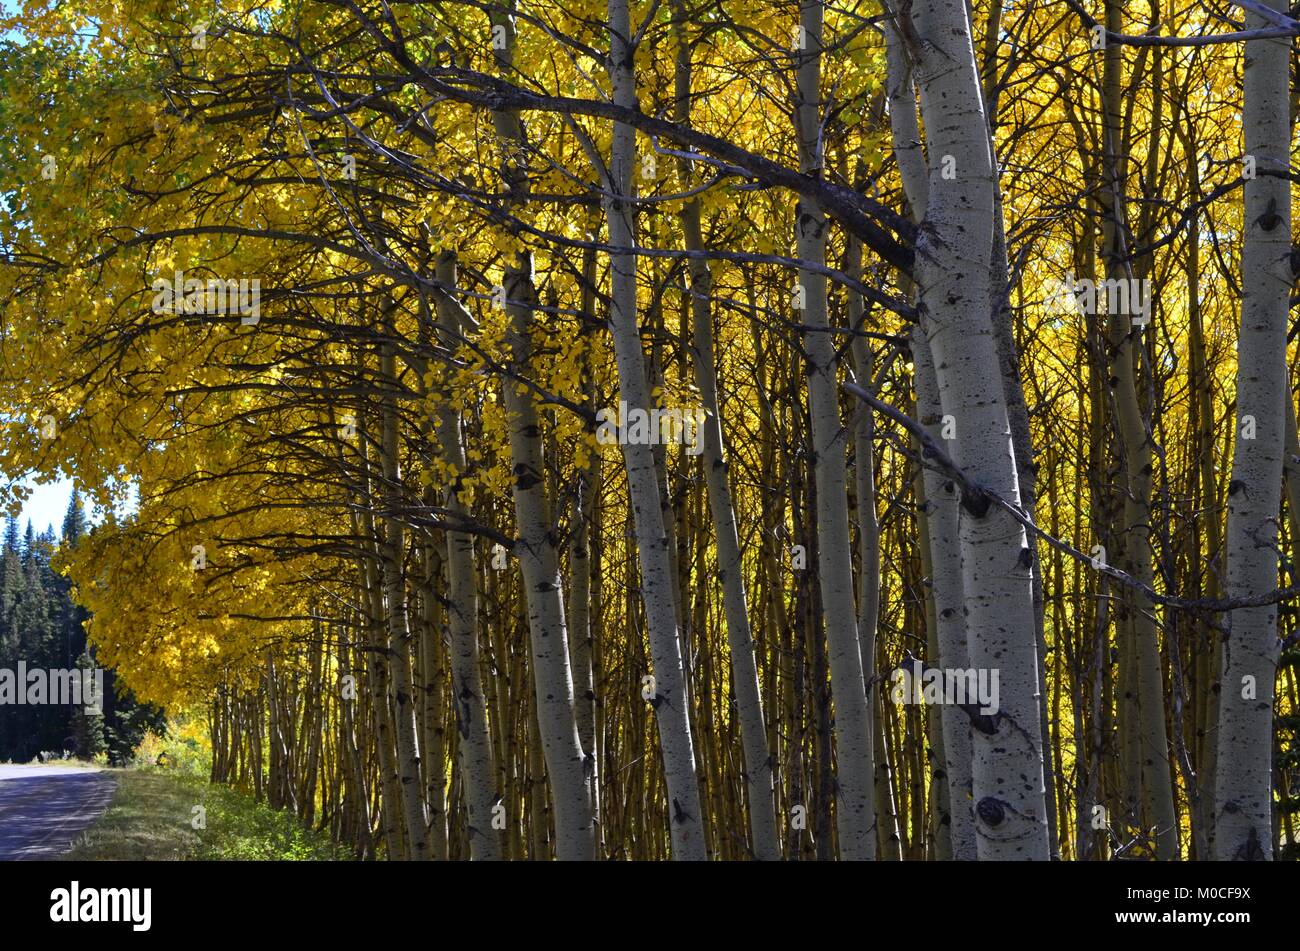 A beautiful row of aspen trees, show off their changing colorful yellow leaves as another season comes to an end Stock Photo